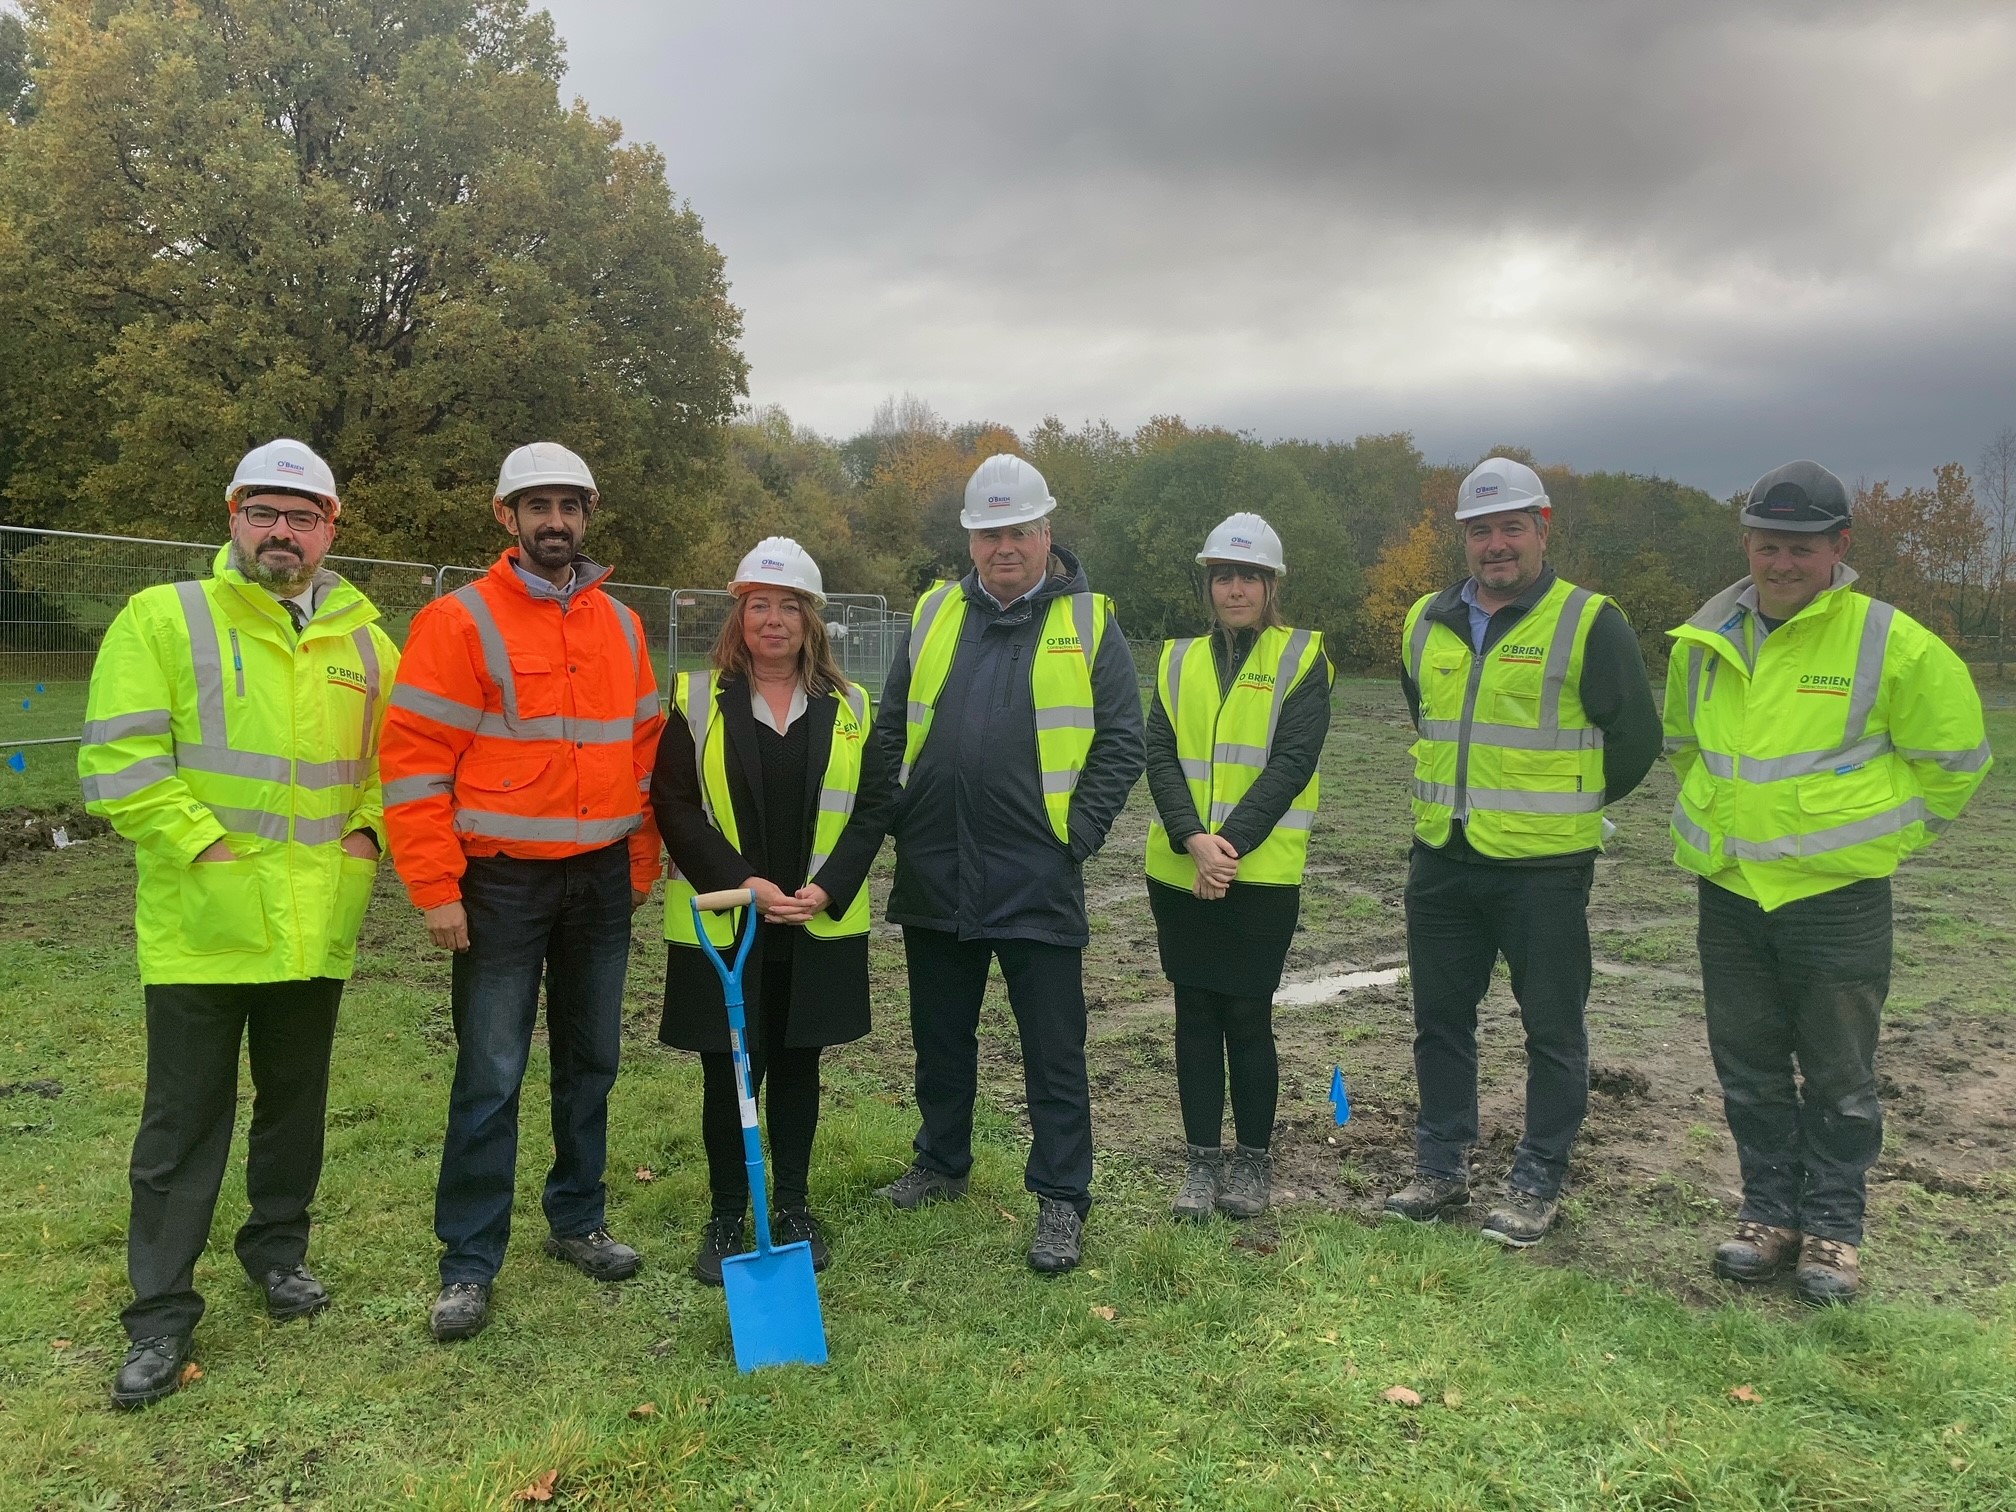 O’Brien Breaks Ground on New Cemetery Project for Sandwell MBC